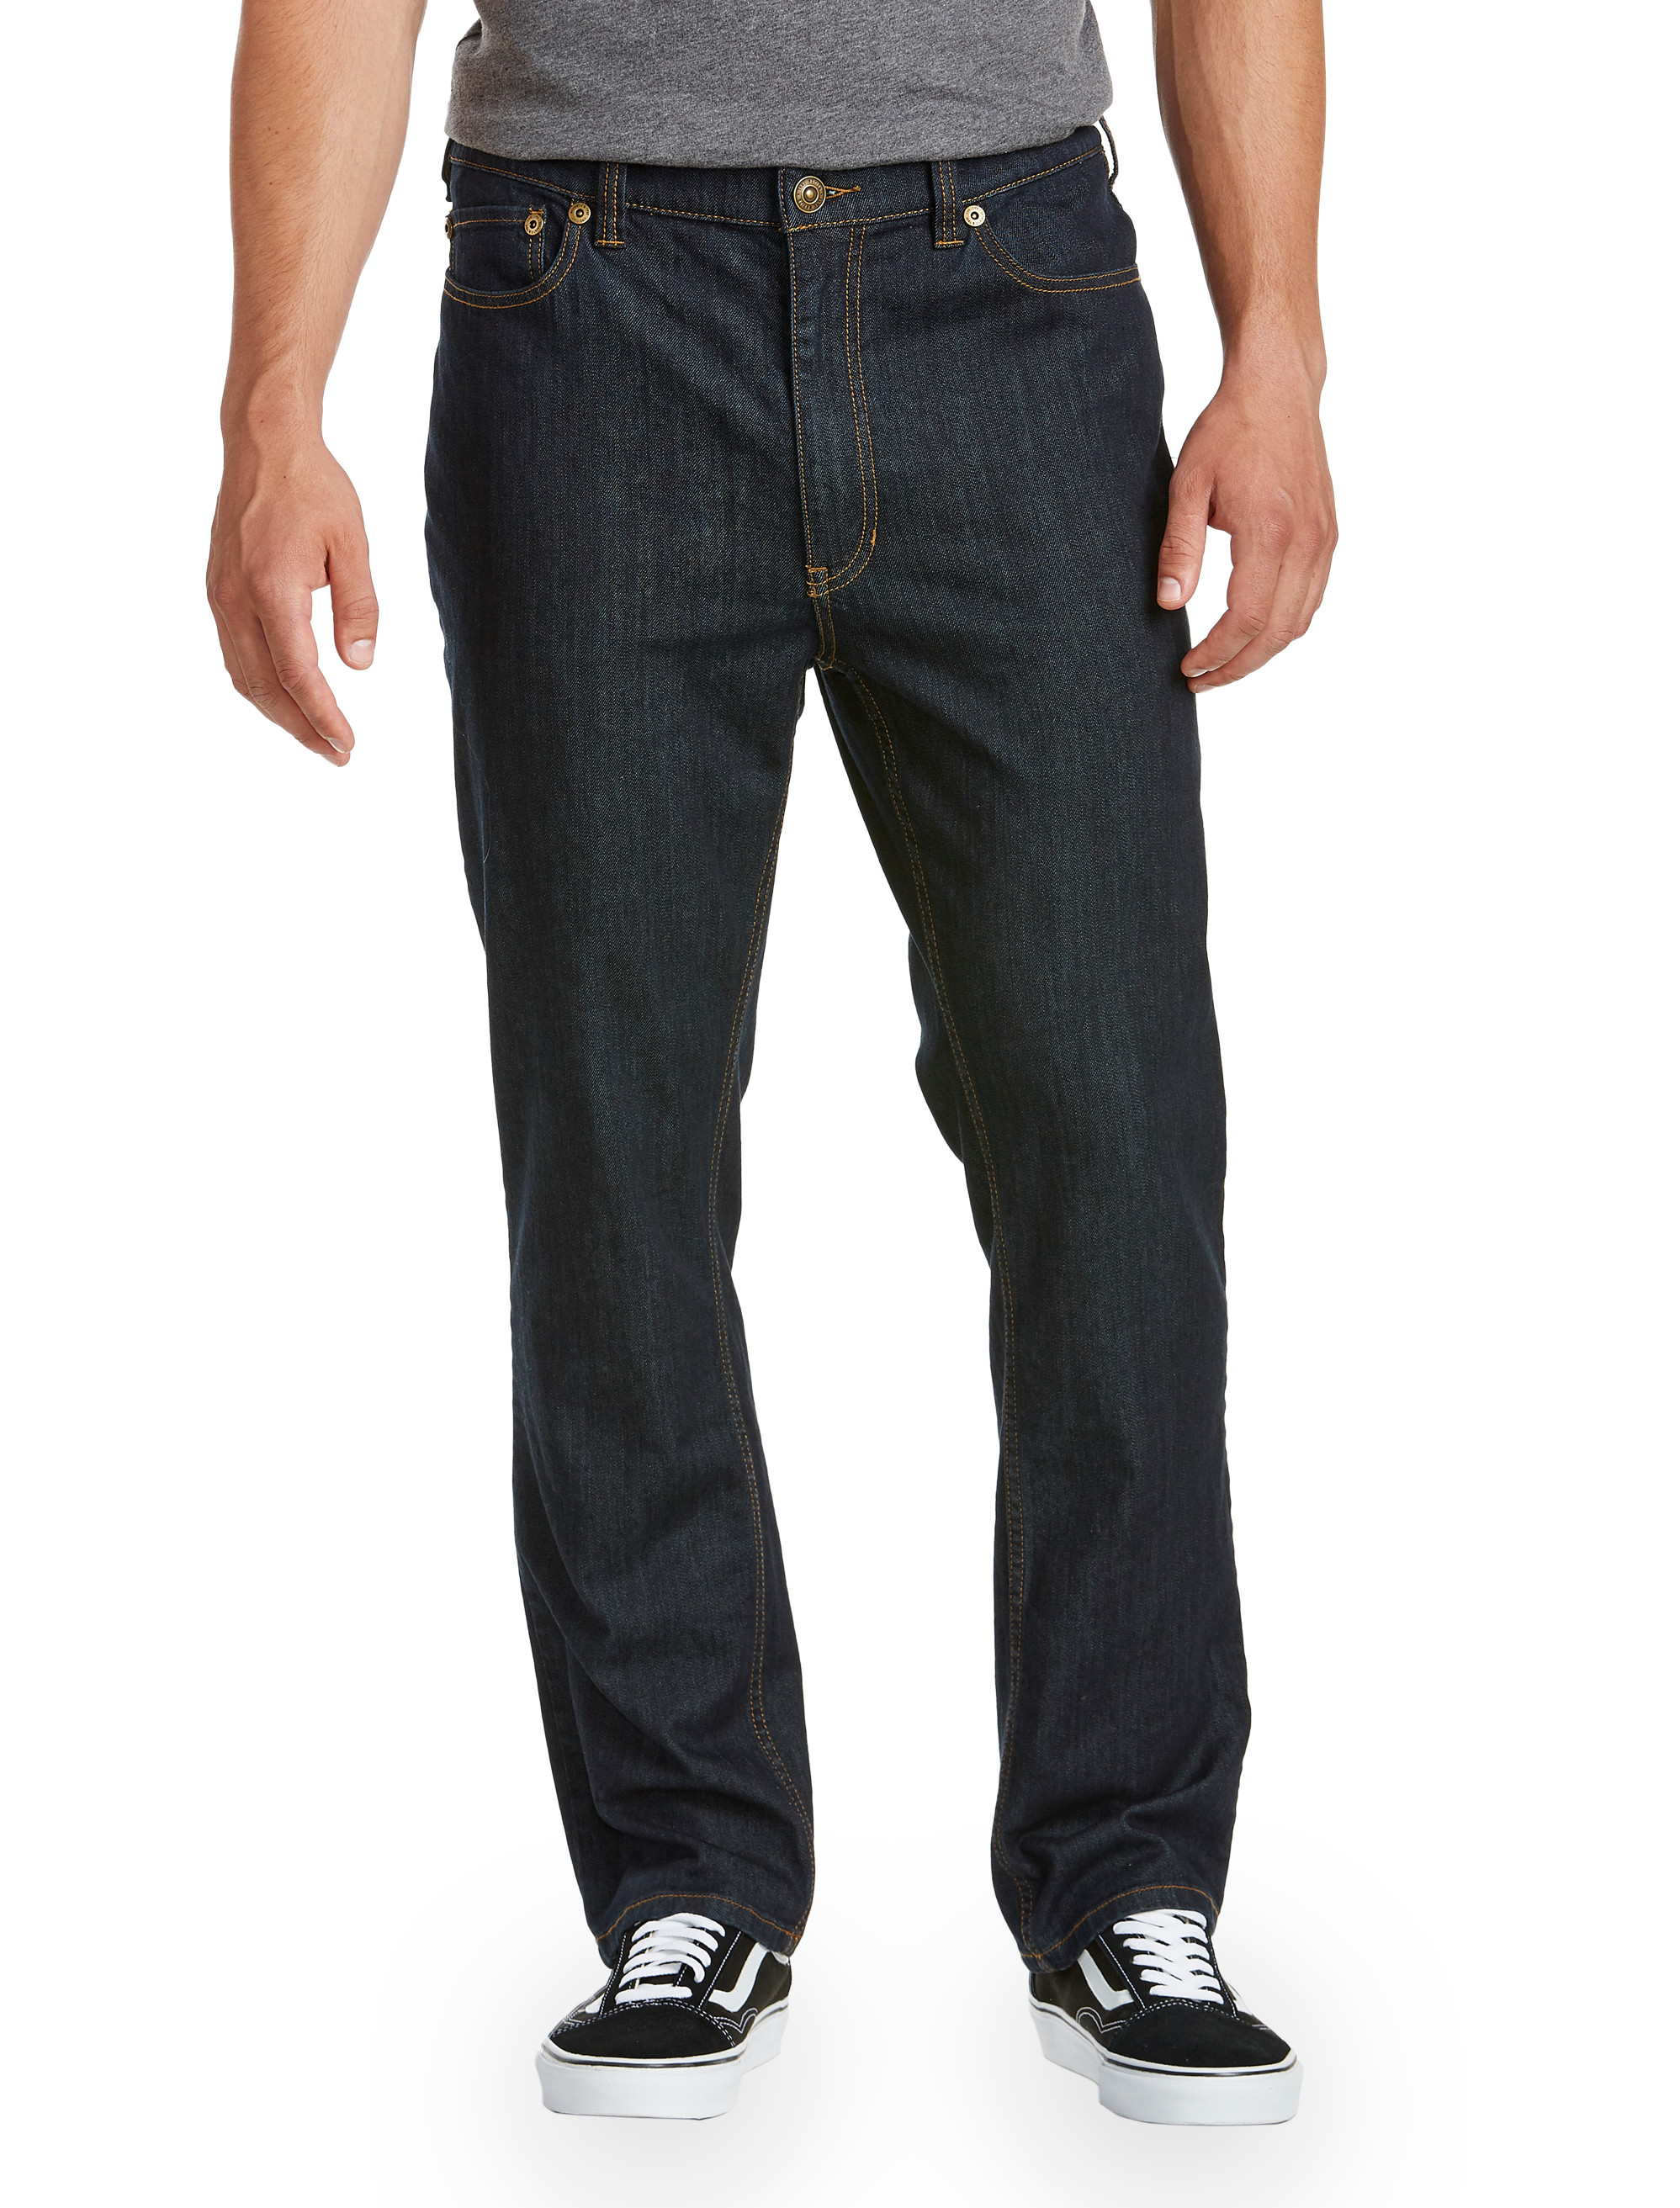 DXL Big and Tall Essentials Loose Fit Jeans, Light Wash, 44W x 28L at   Men's Clothing store